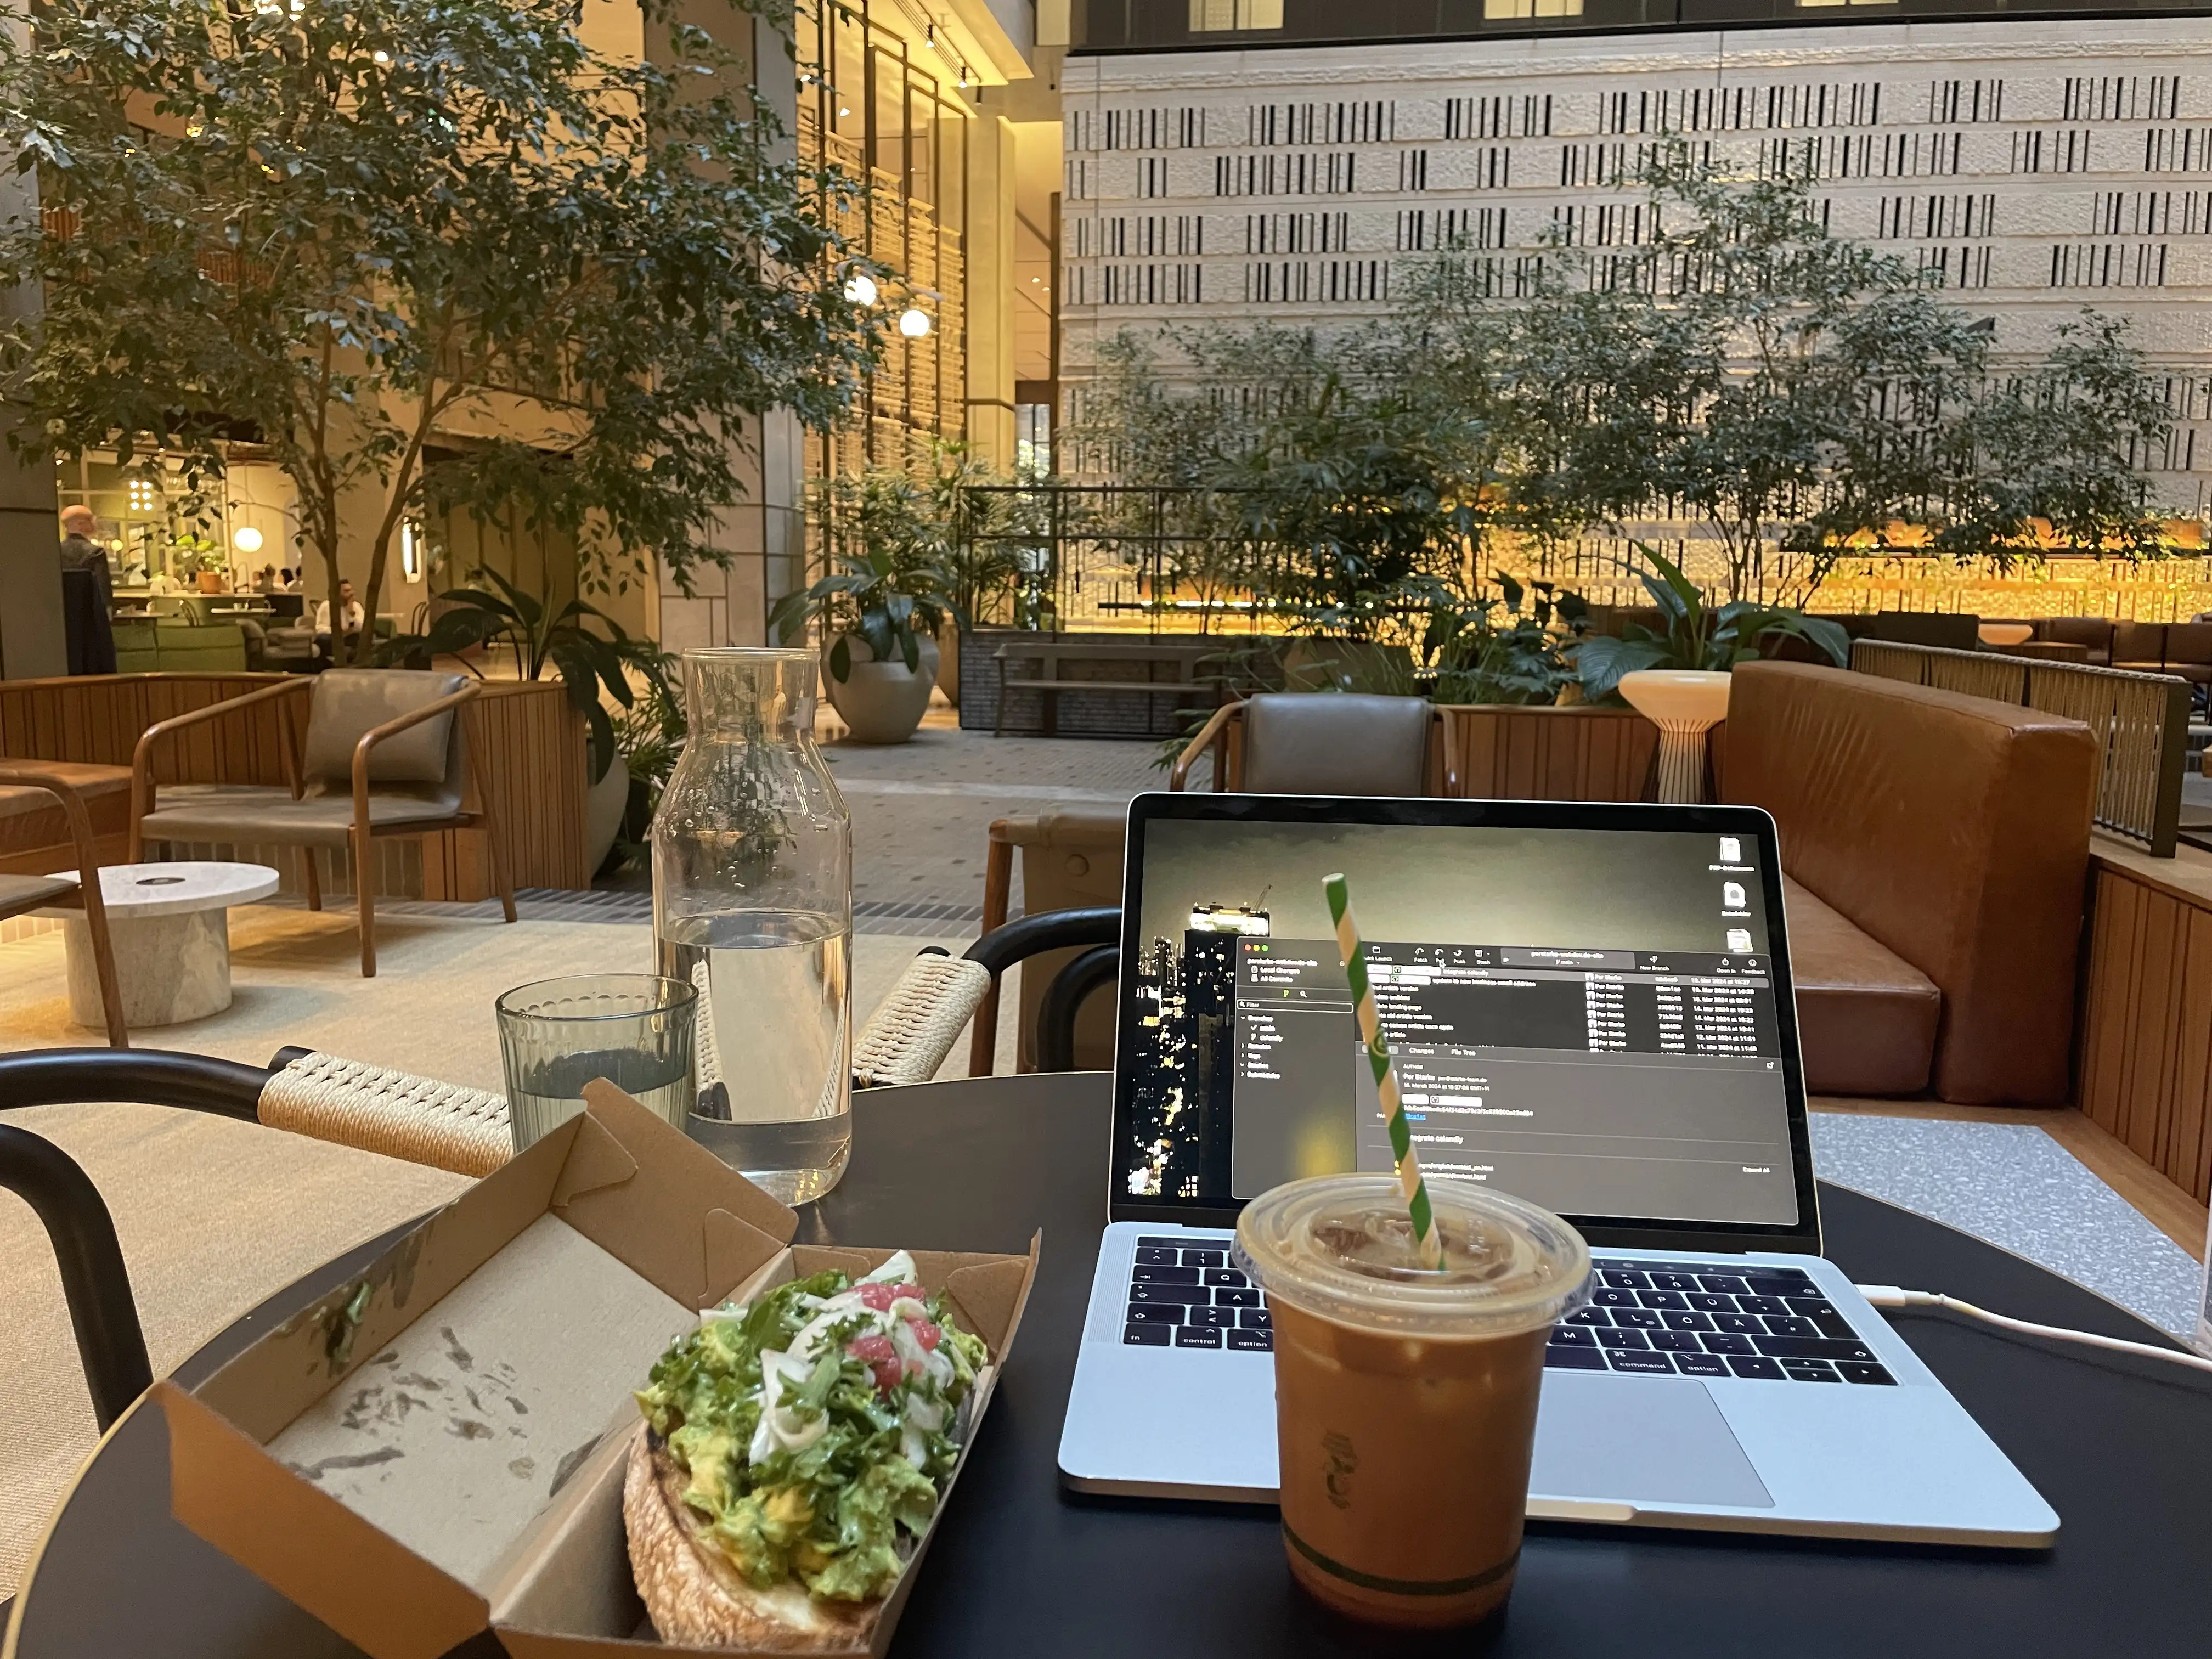 Working from Liminal Coffee at Melbourne City, Australia